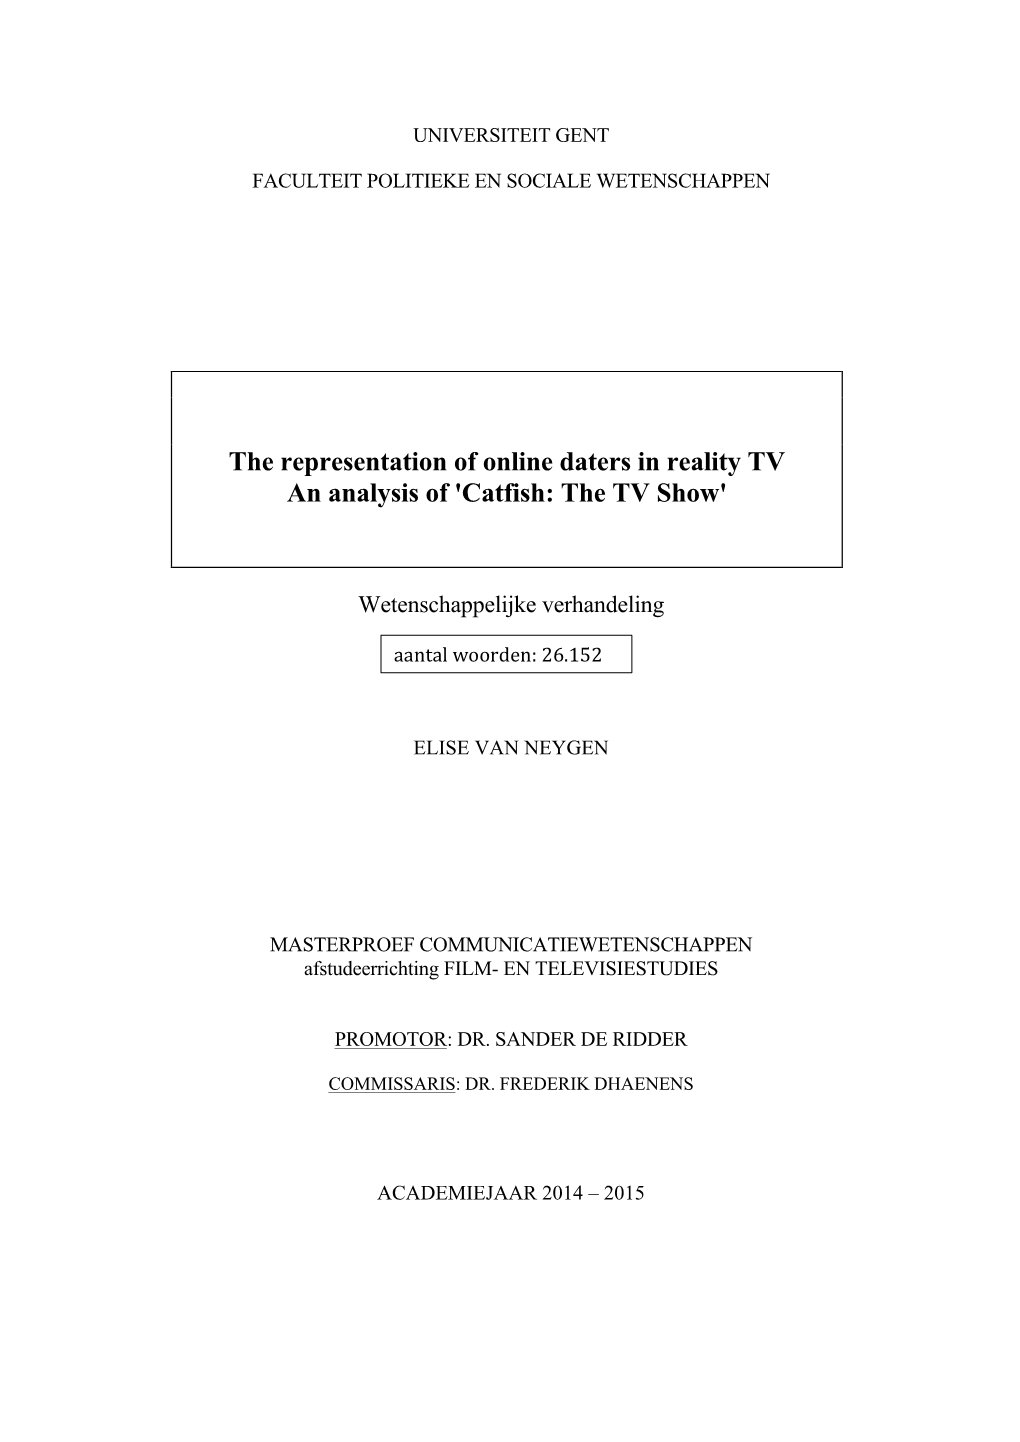 The Representation of Online Daters in Reality TV an Analysis of 'Catfish: the TV Show'